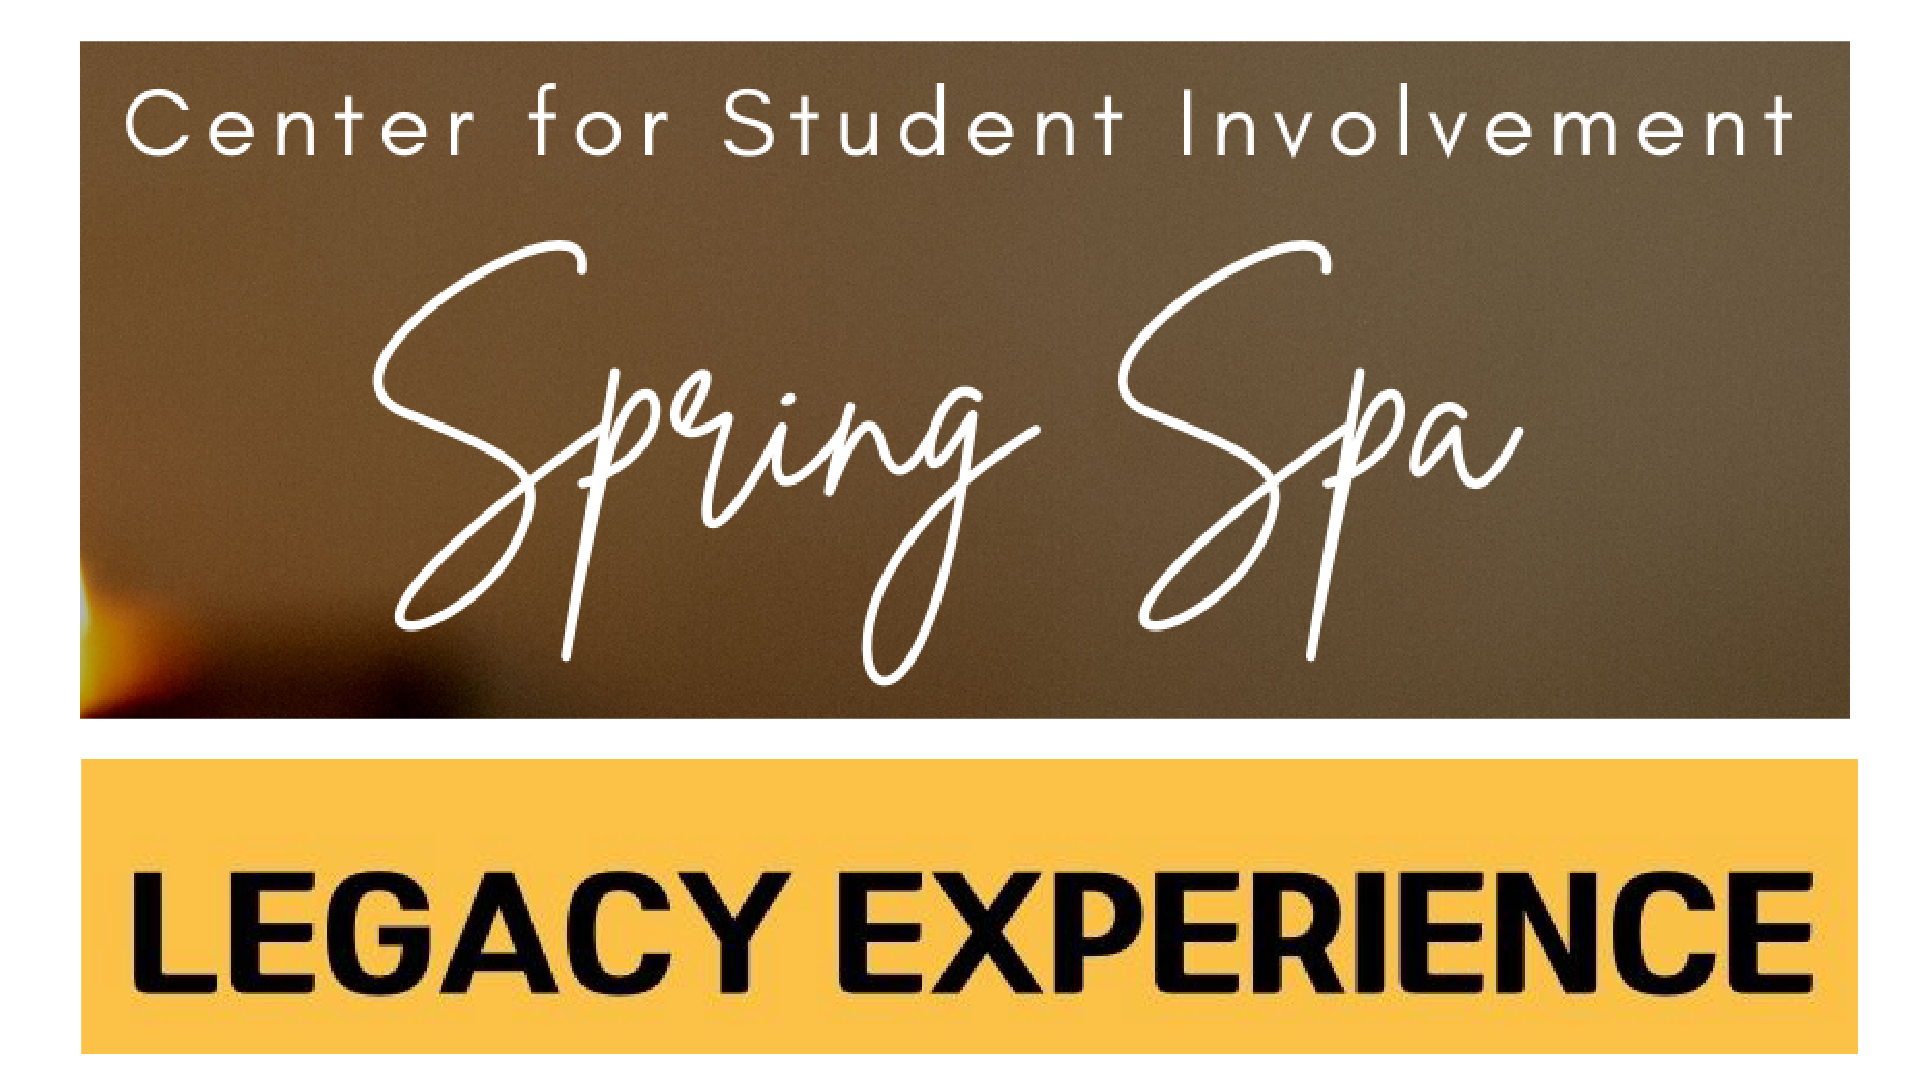 Center for Student Involvement, Spring Spa, Legacy Experience